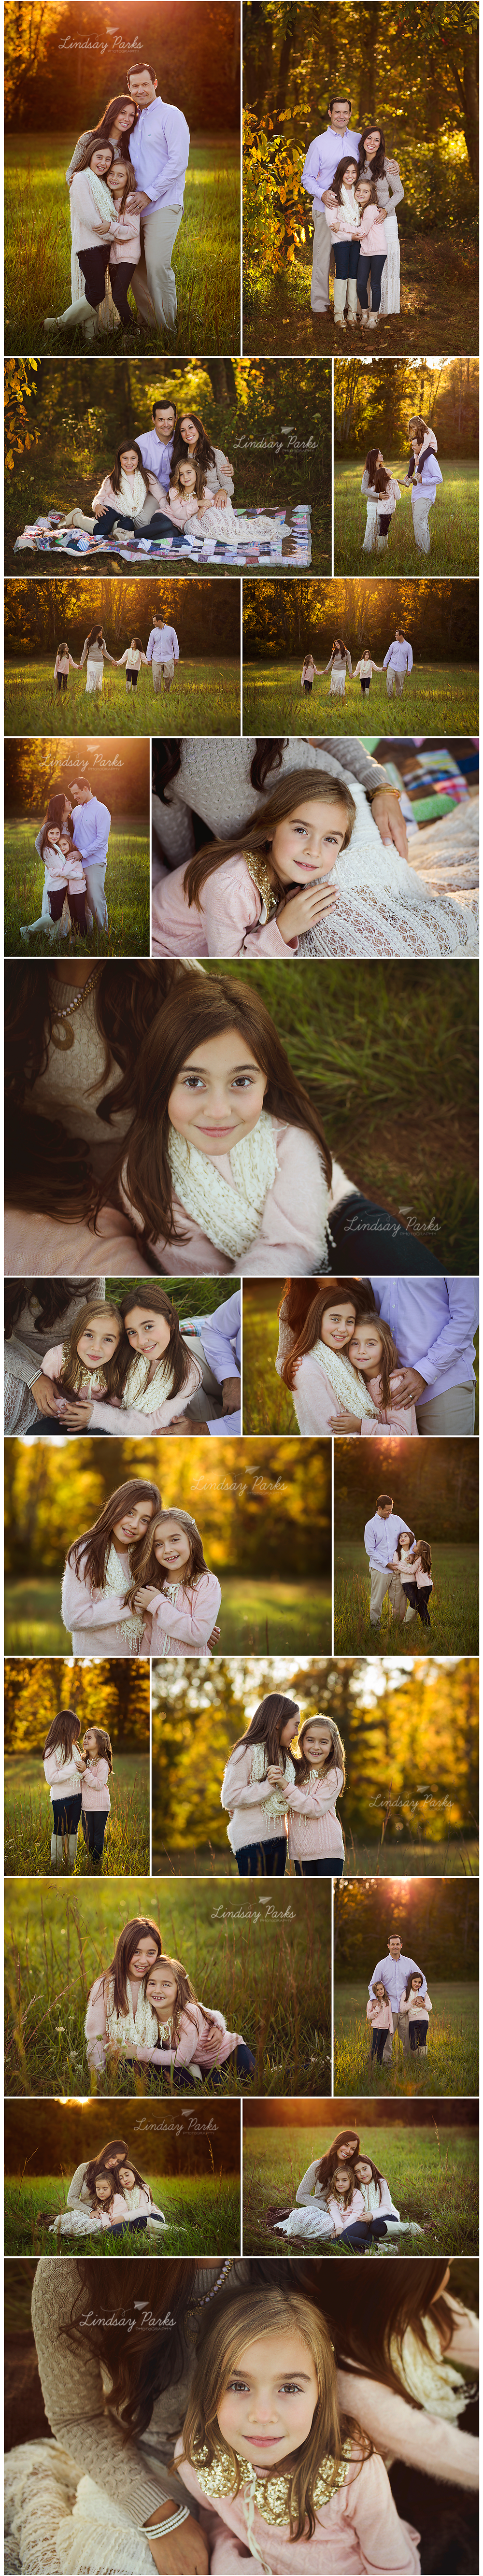 harford_county_maryland_family_and_child_photographer